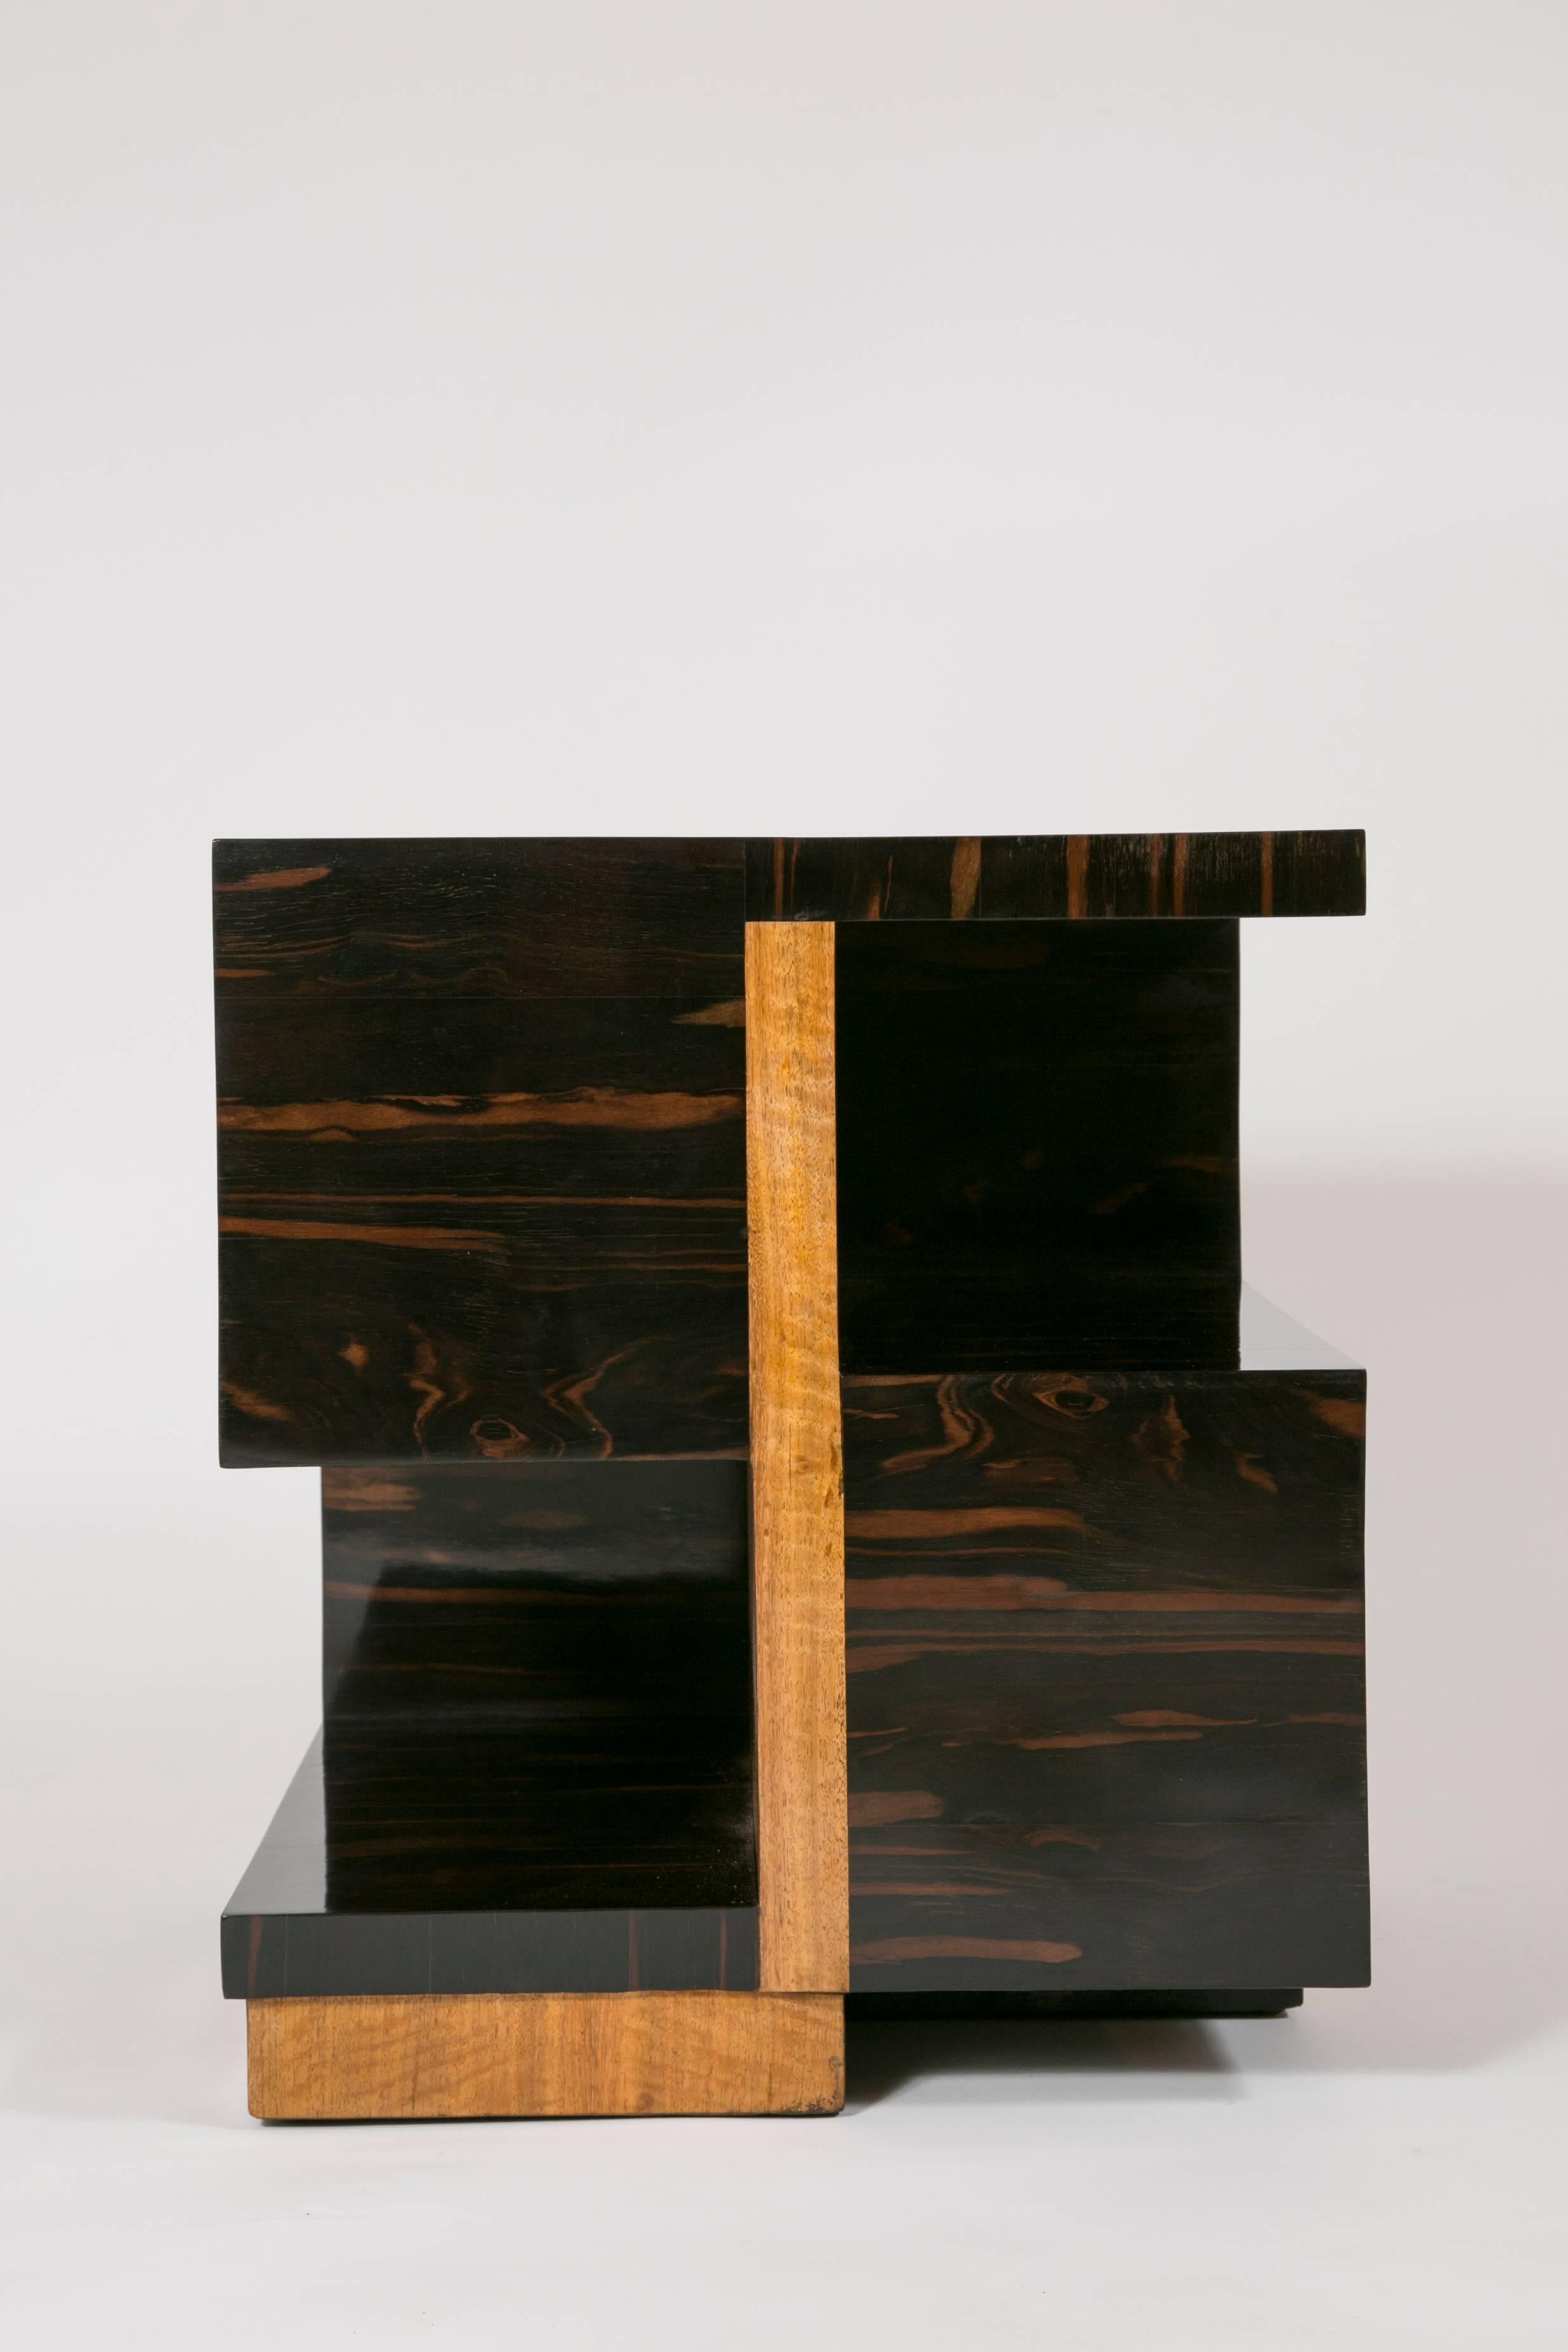 Important side table by genius famous French designer Jacques Adnet (1900-1981)
The similar model was exhibited during the Parisian 